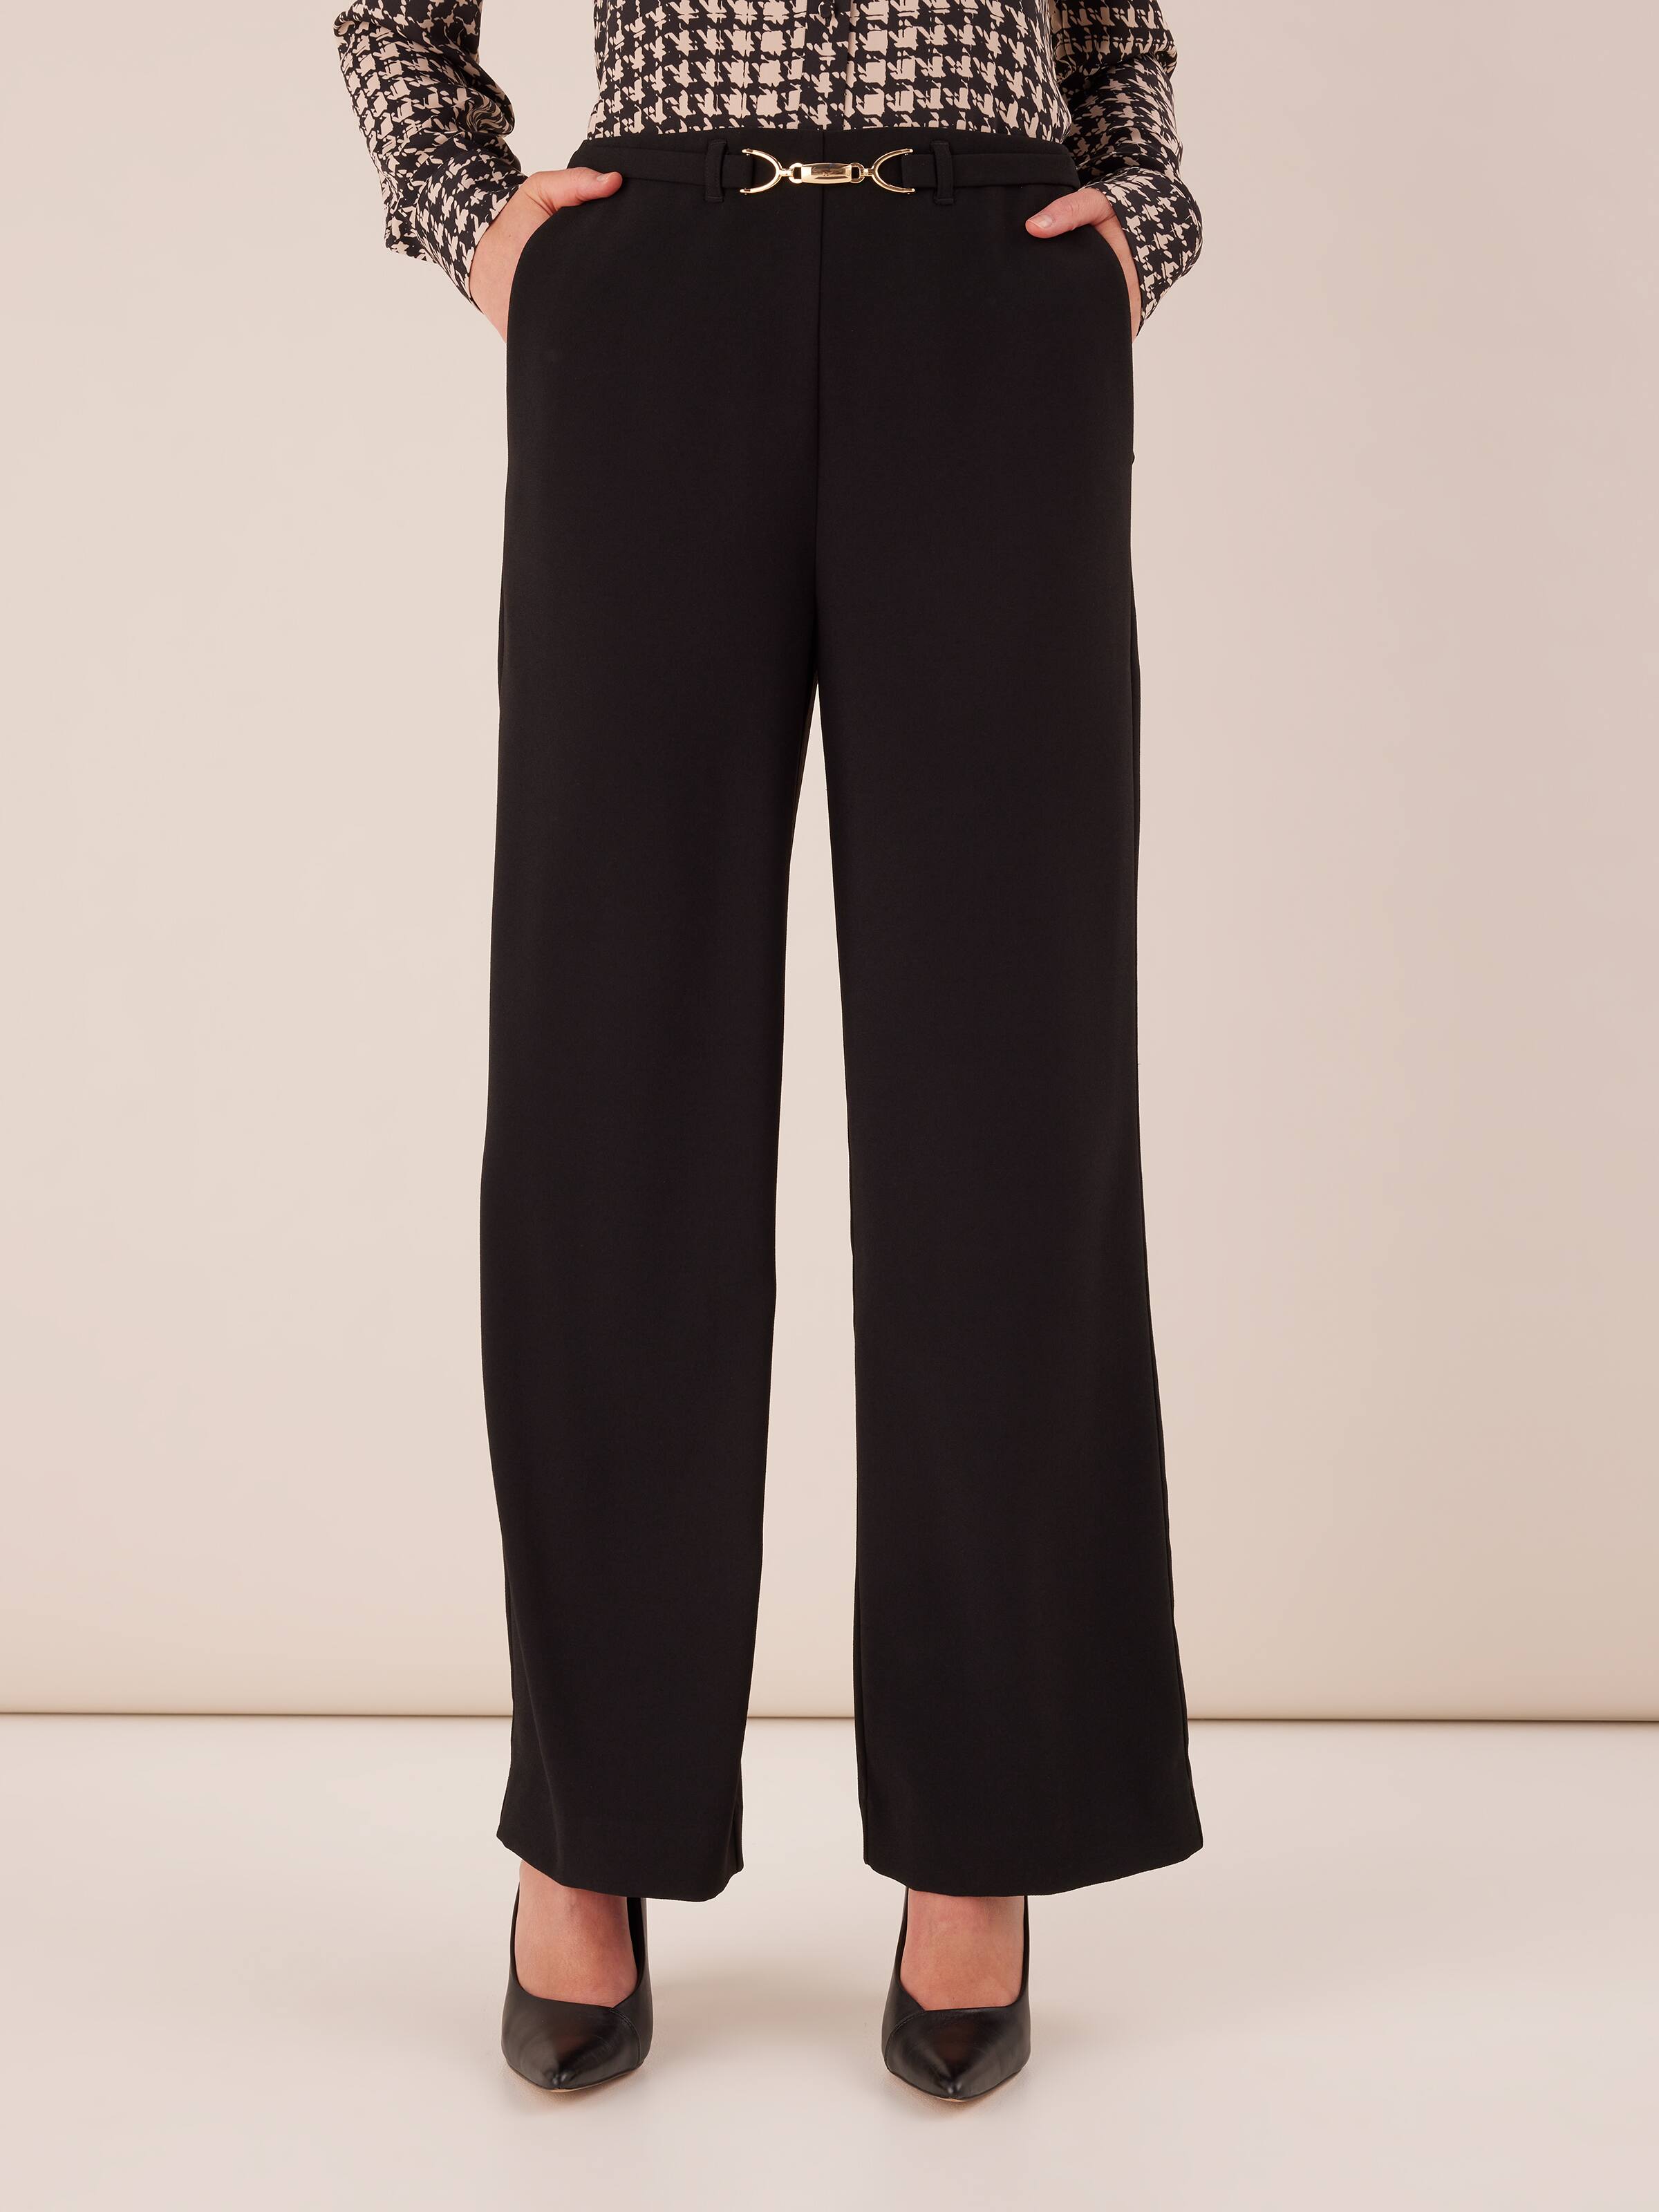 uk size 14 woman pants - Buy uk size 14 woman pants at Best Price in  Malaysia